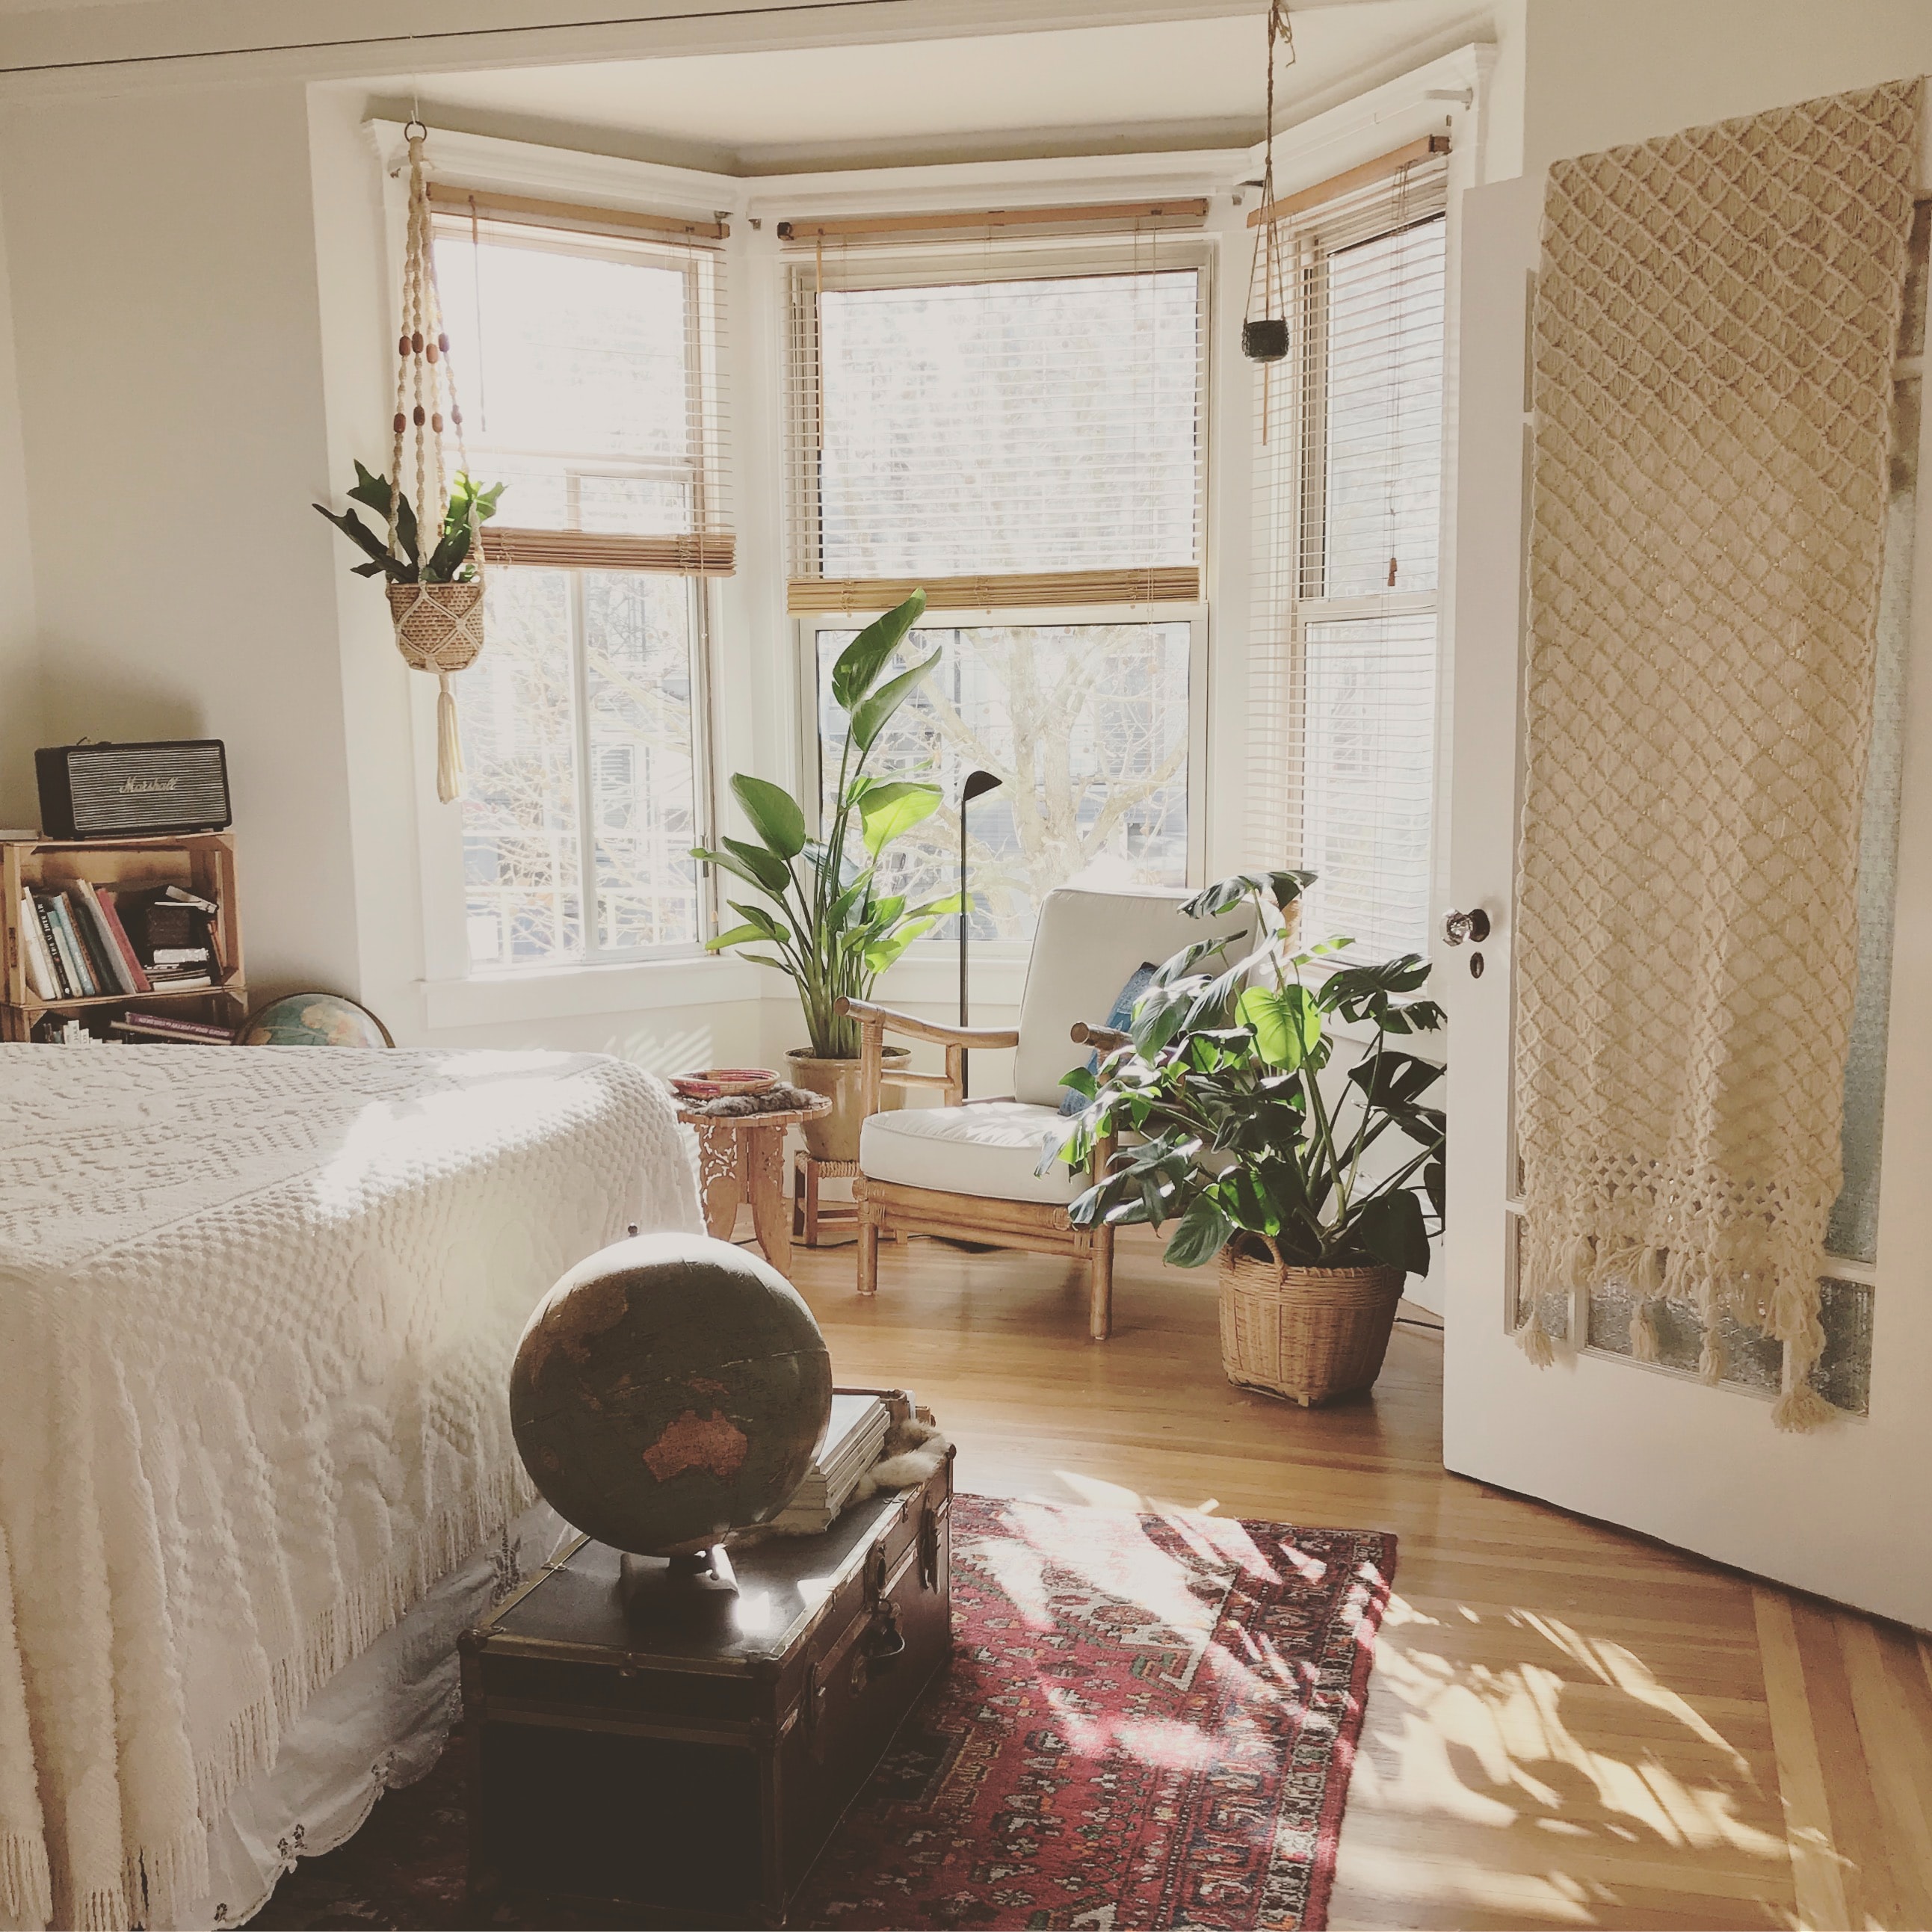 Sunlit bedroom with lots of plants